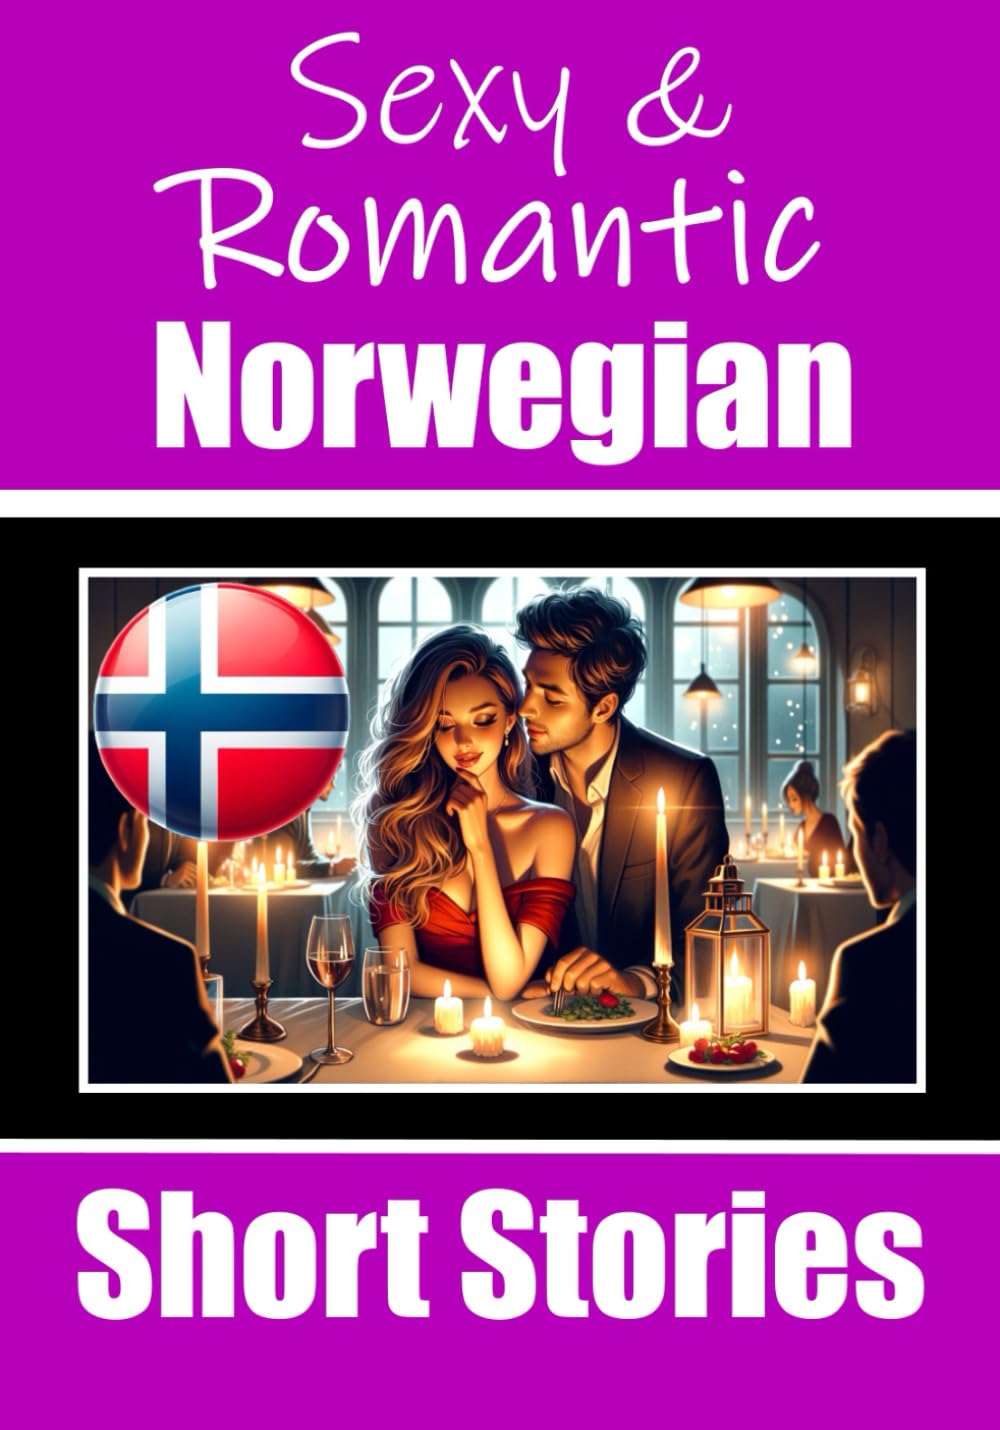 50 Sexy & Romantic Short Stories to Learn Norwegian